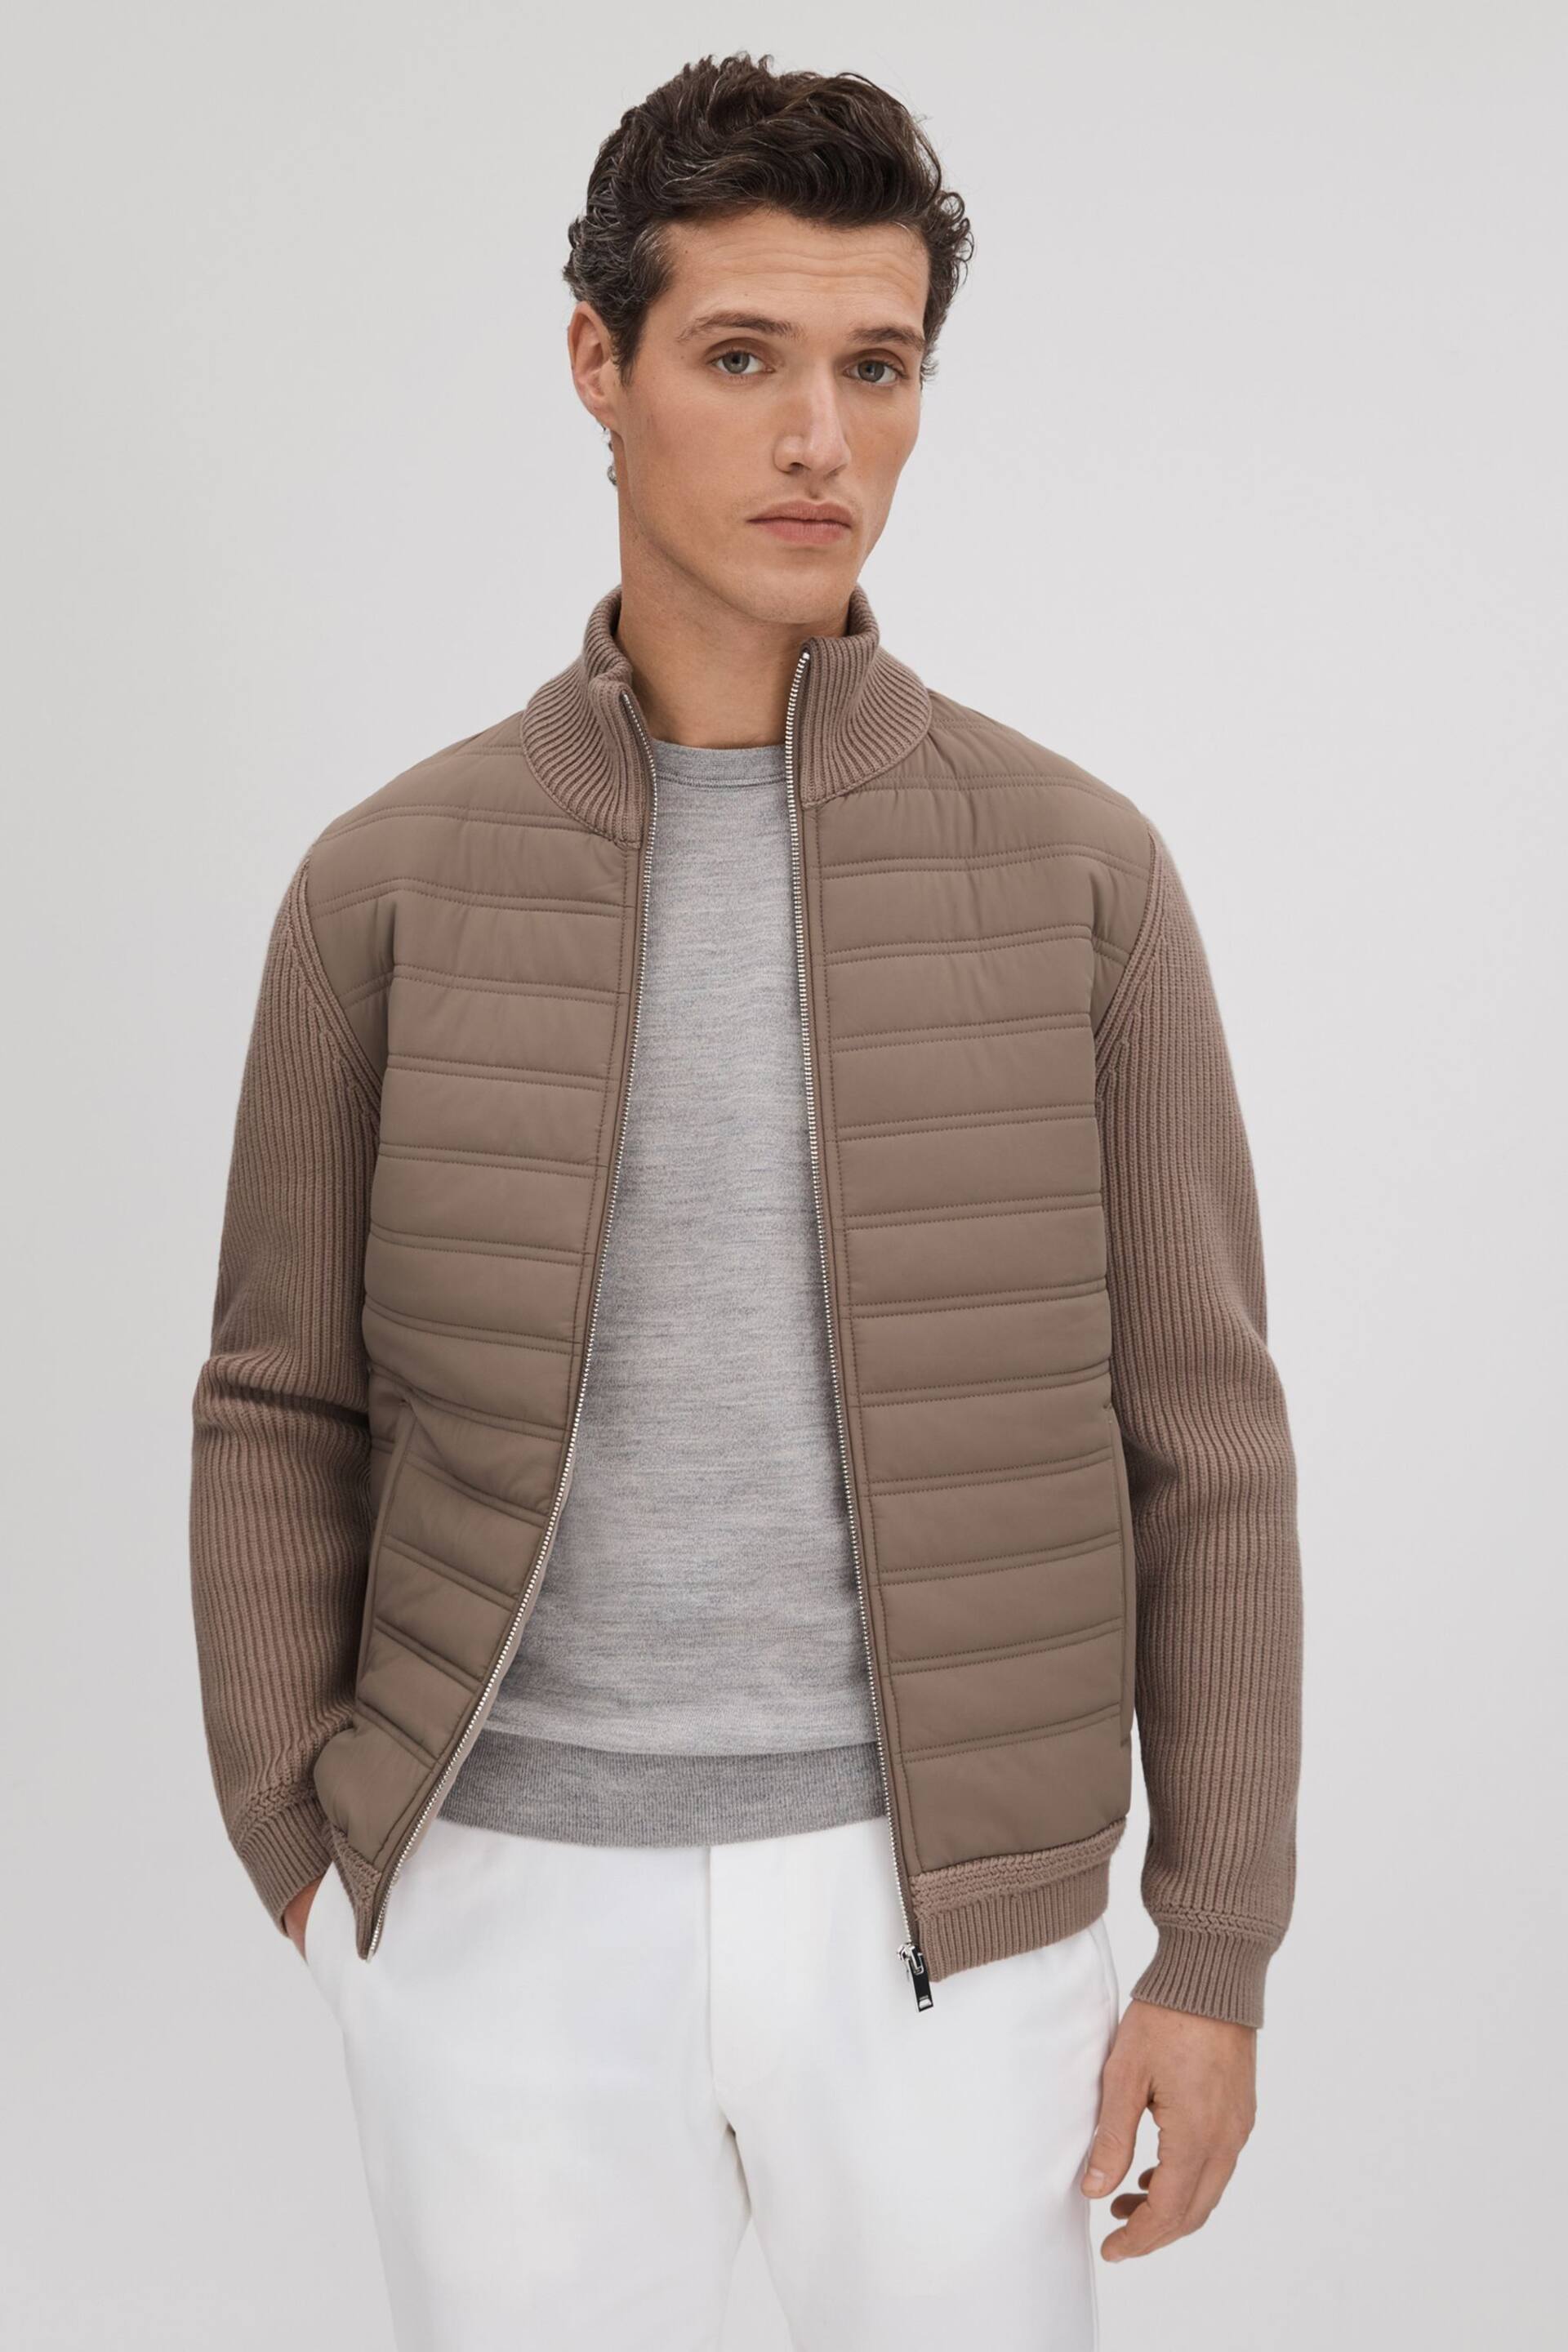 Reiss Mink Southend Hybrid Quilt and Knit Zip-Through Jacket - Image 1 of 6